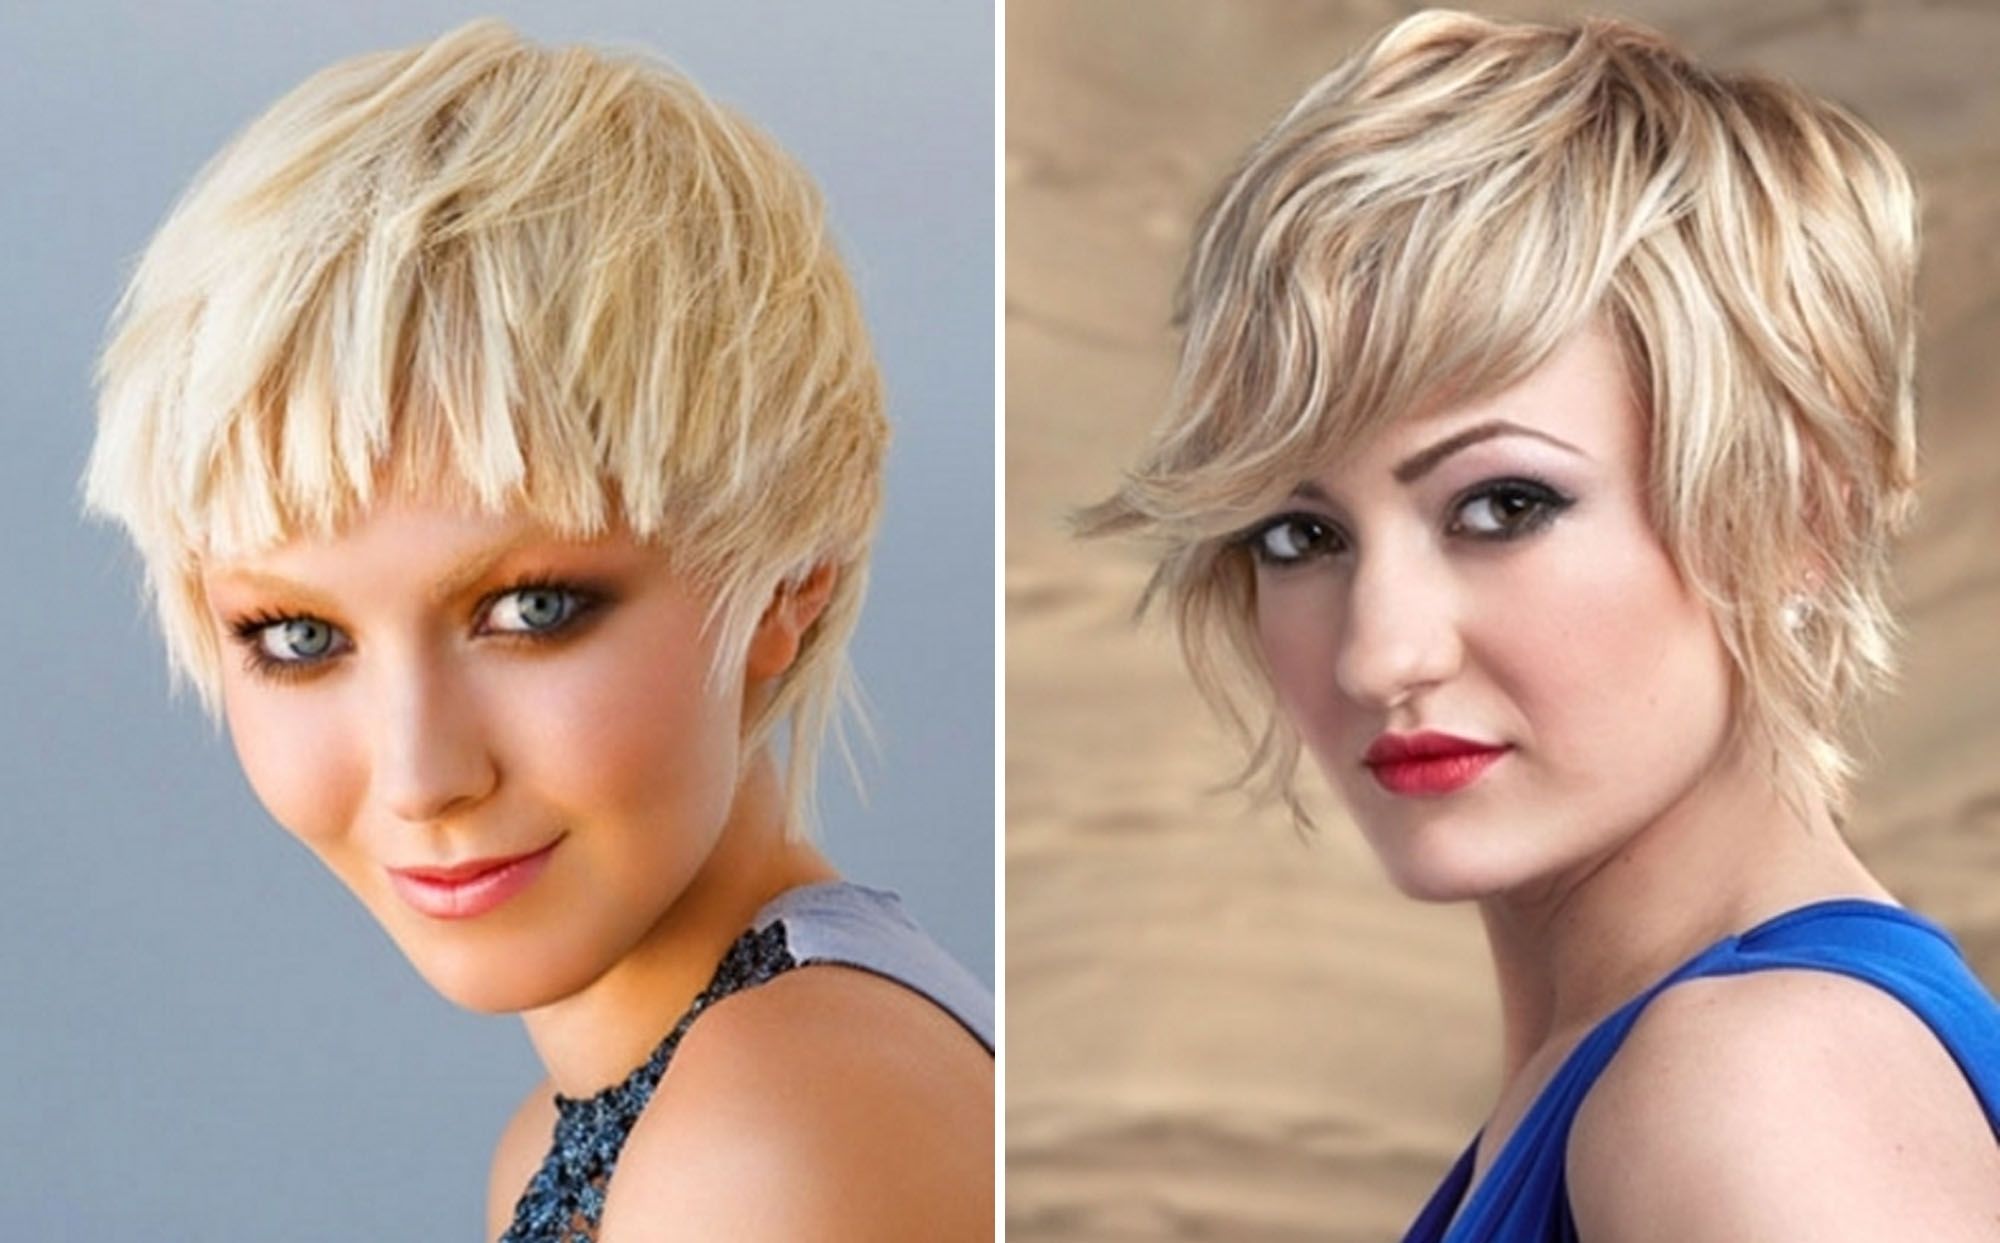 Short Choppy Haircuts Blonde Hair Color | Medium Hair Styles Ideas With Regard To Current Choppy Pixie Haircuts With Side Bangs (View 12 of 15)